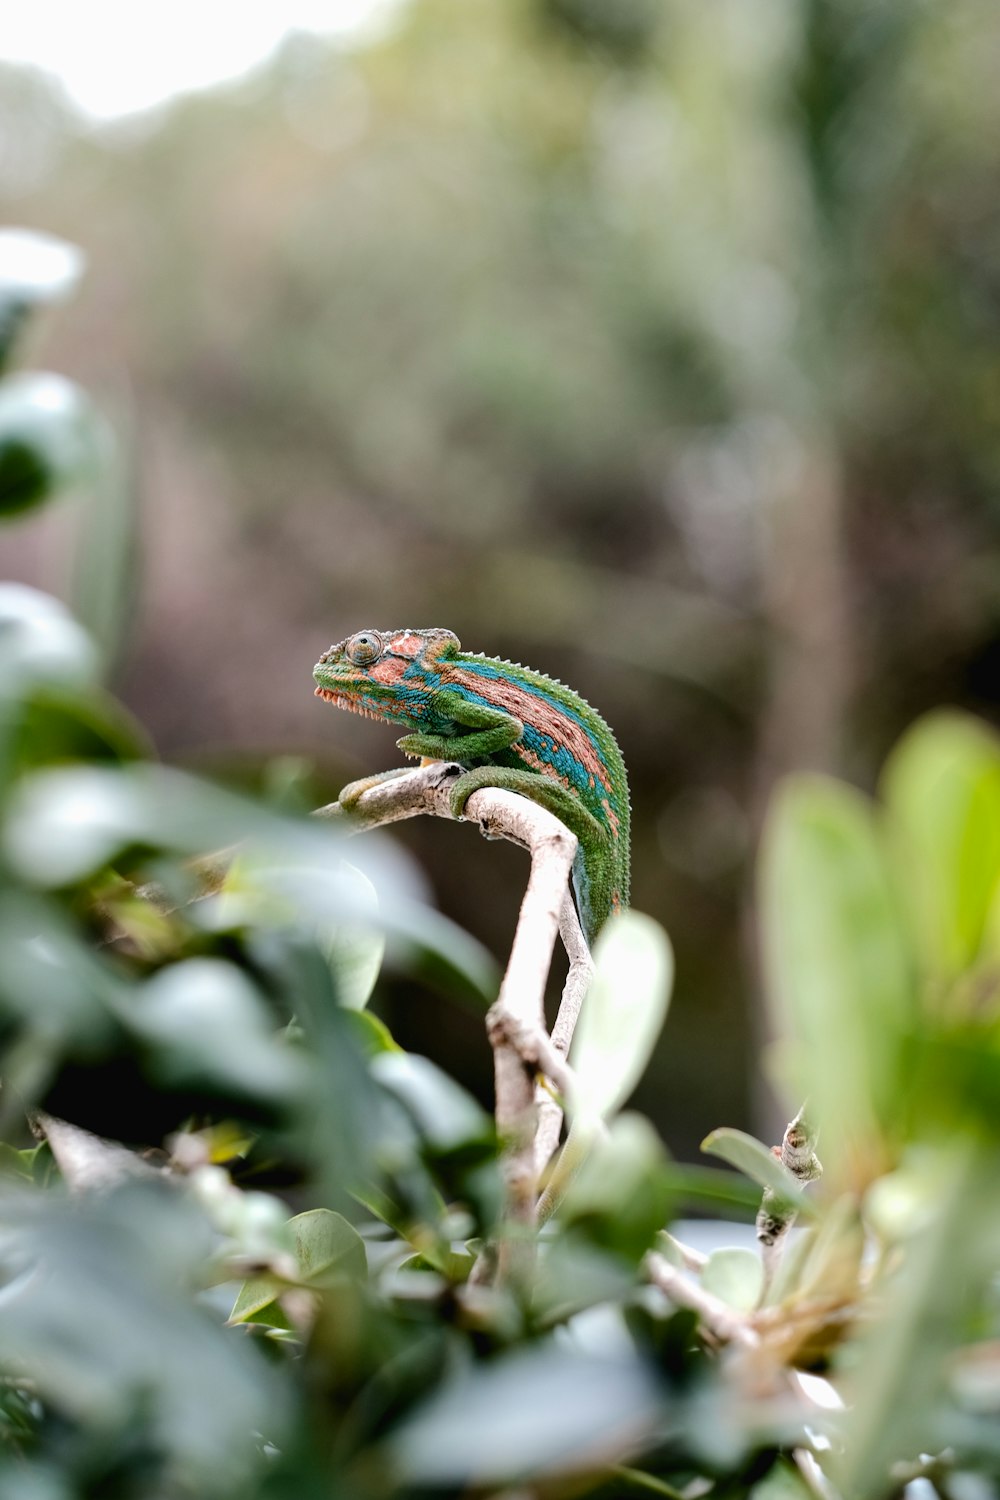 green and brown lizard on tree branch